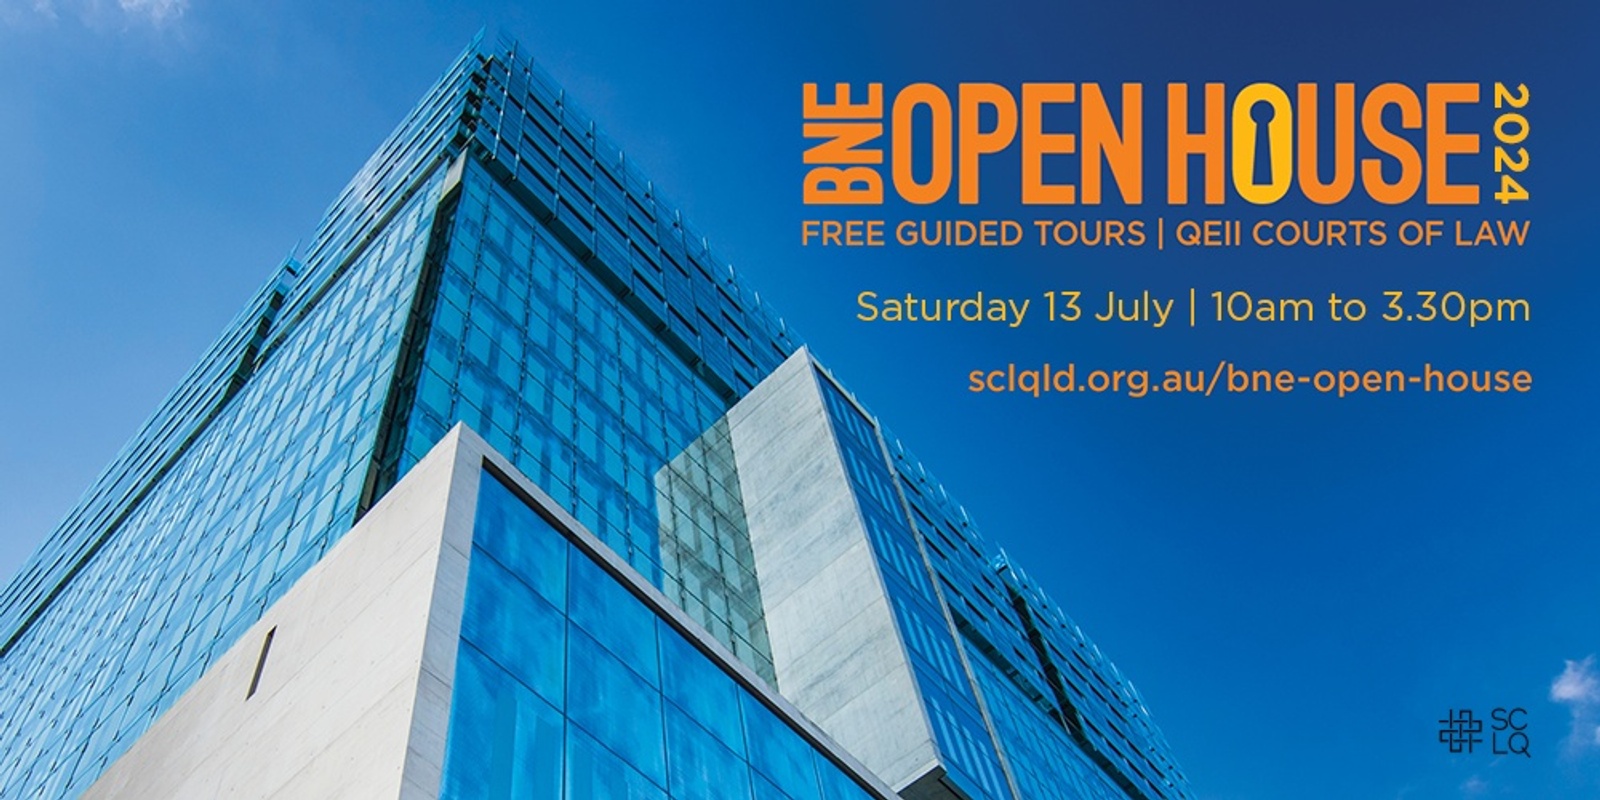 Banner image for Brisbane Open House tour:  Queen Elizabeth II Courts of Law building